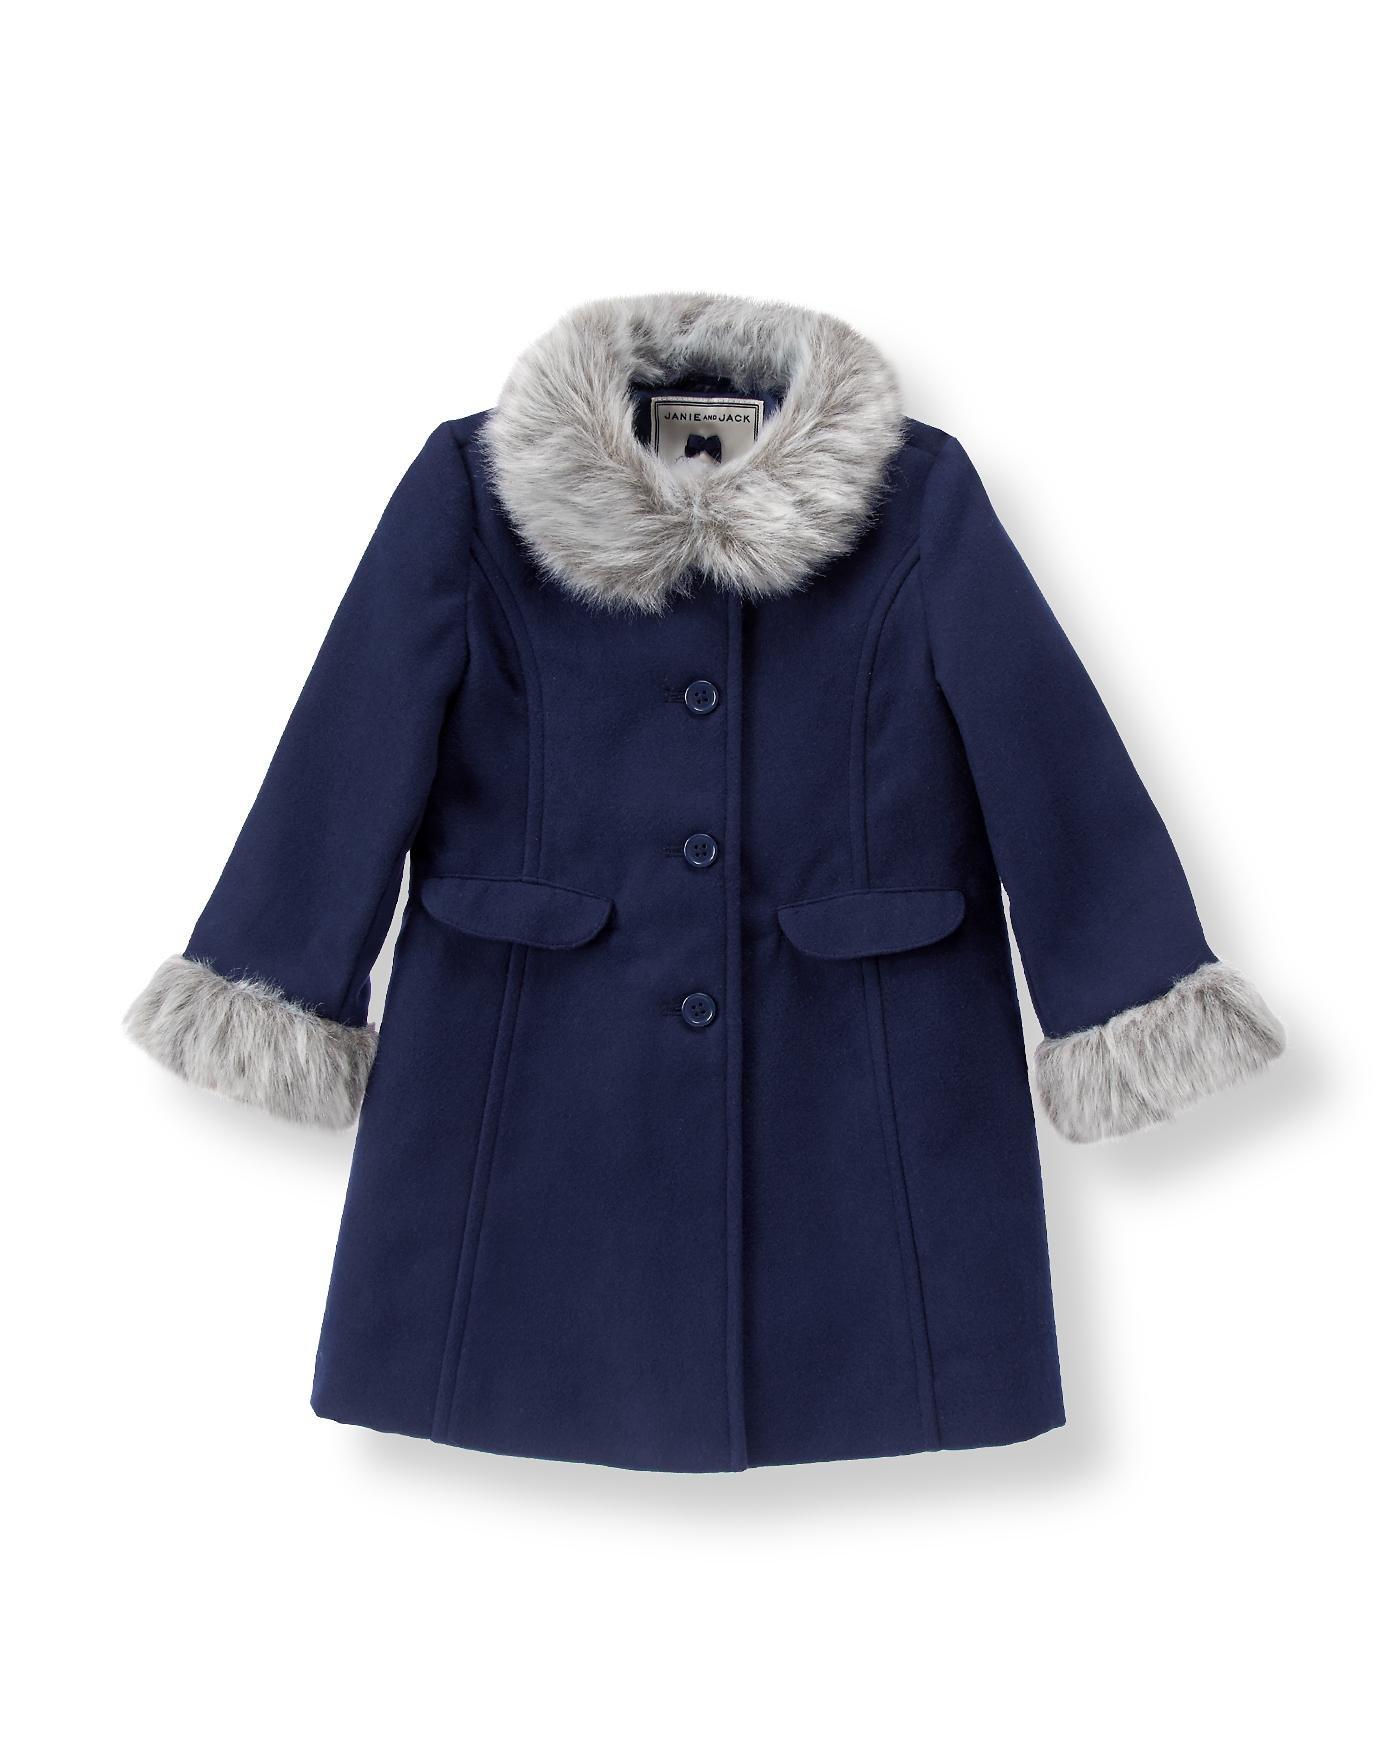 Girl Navy Faux Fur Trim Coat by Janie and Jack